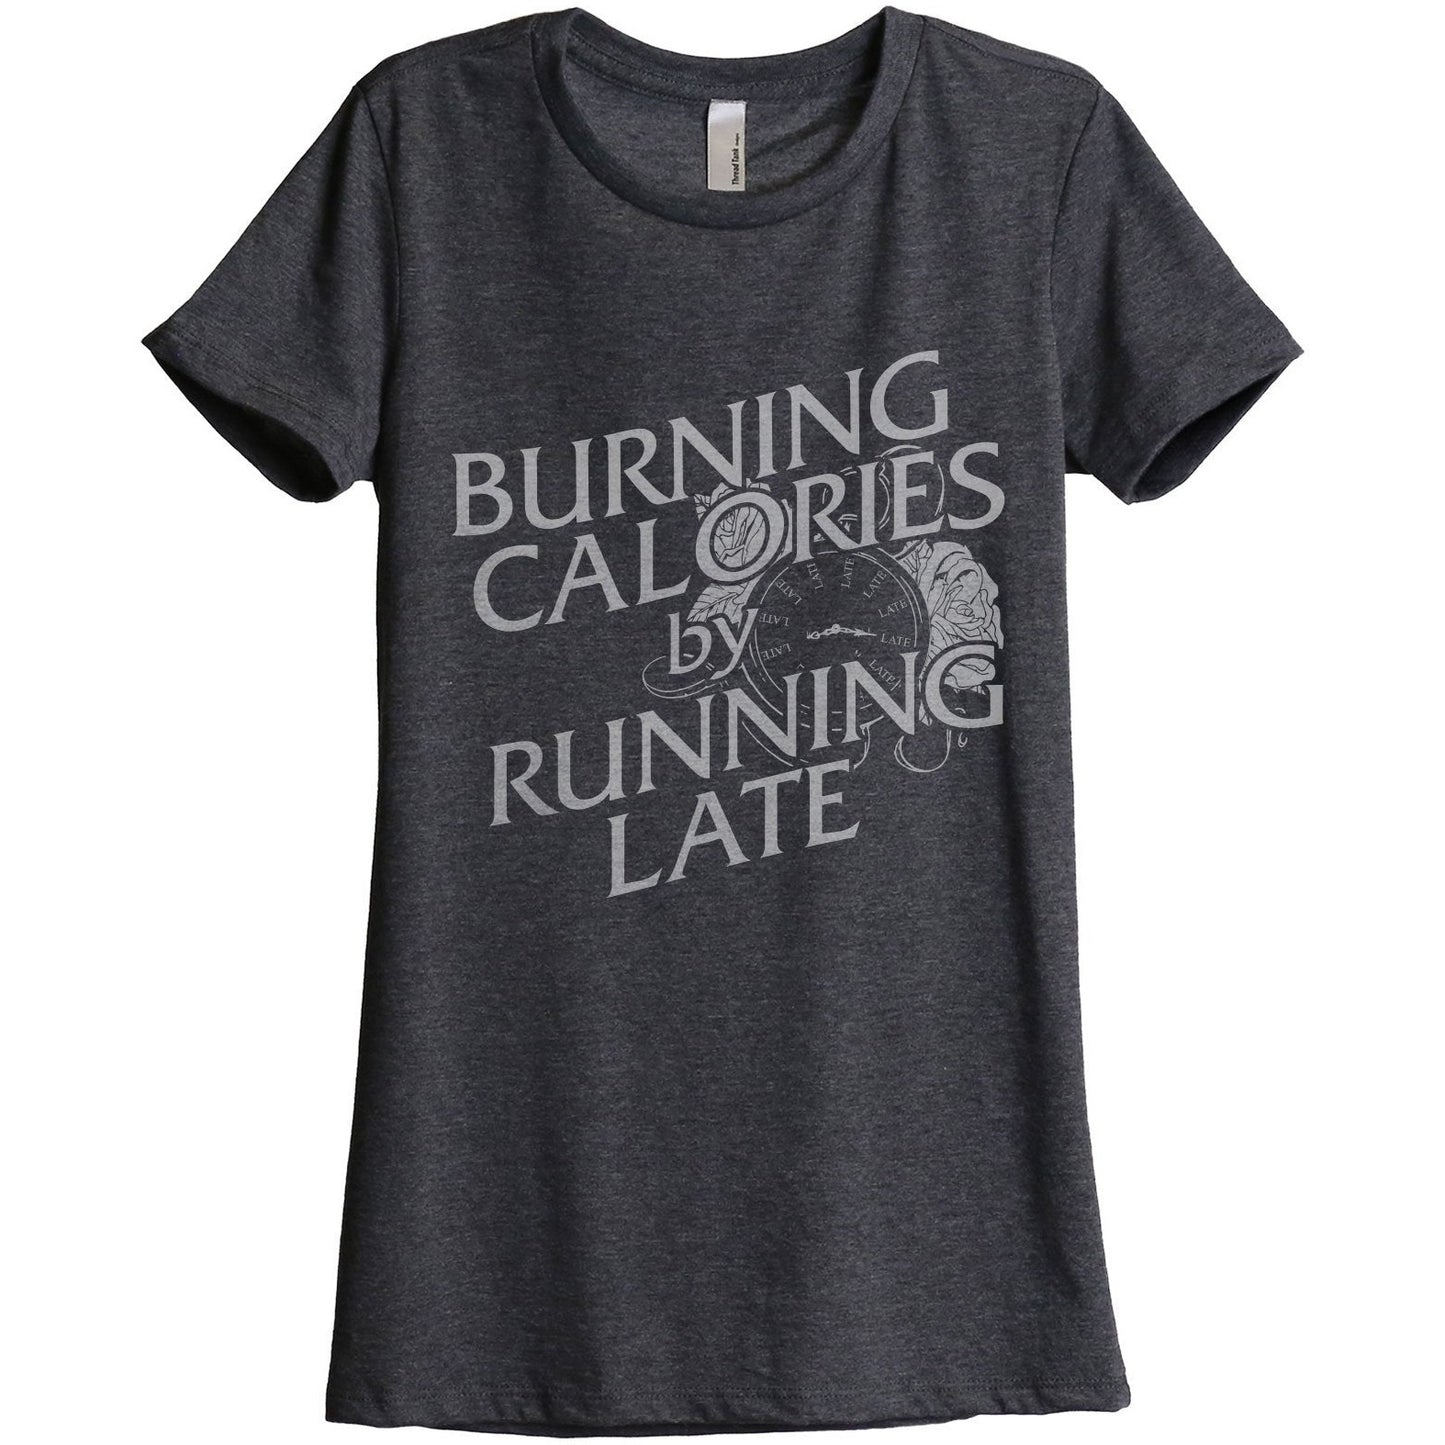 Burning Calories By Running Late Women's Relaxed Crewneck T-Shirt Top Tee Charcoal Grey
